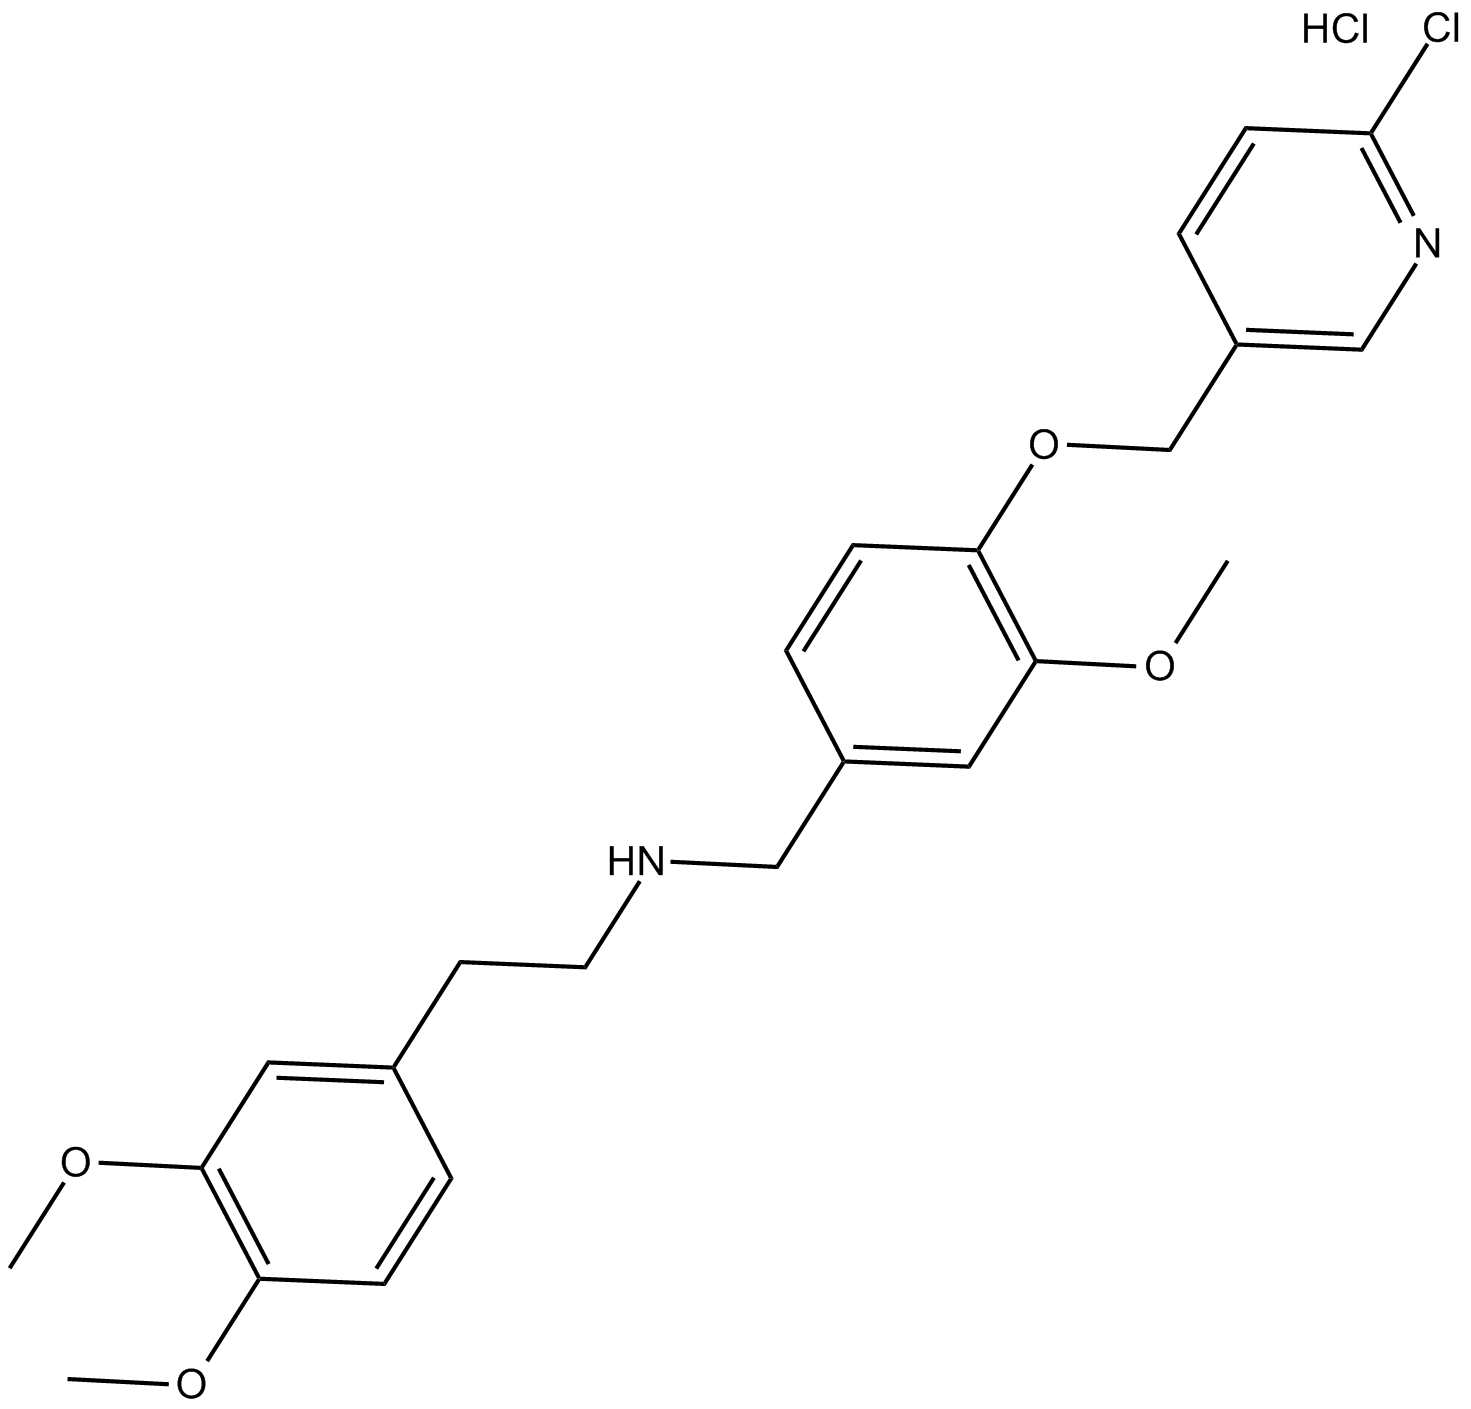 SBE 13 HCl  Chemical Structure